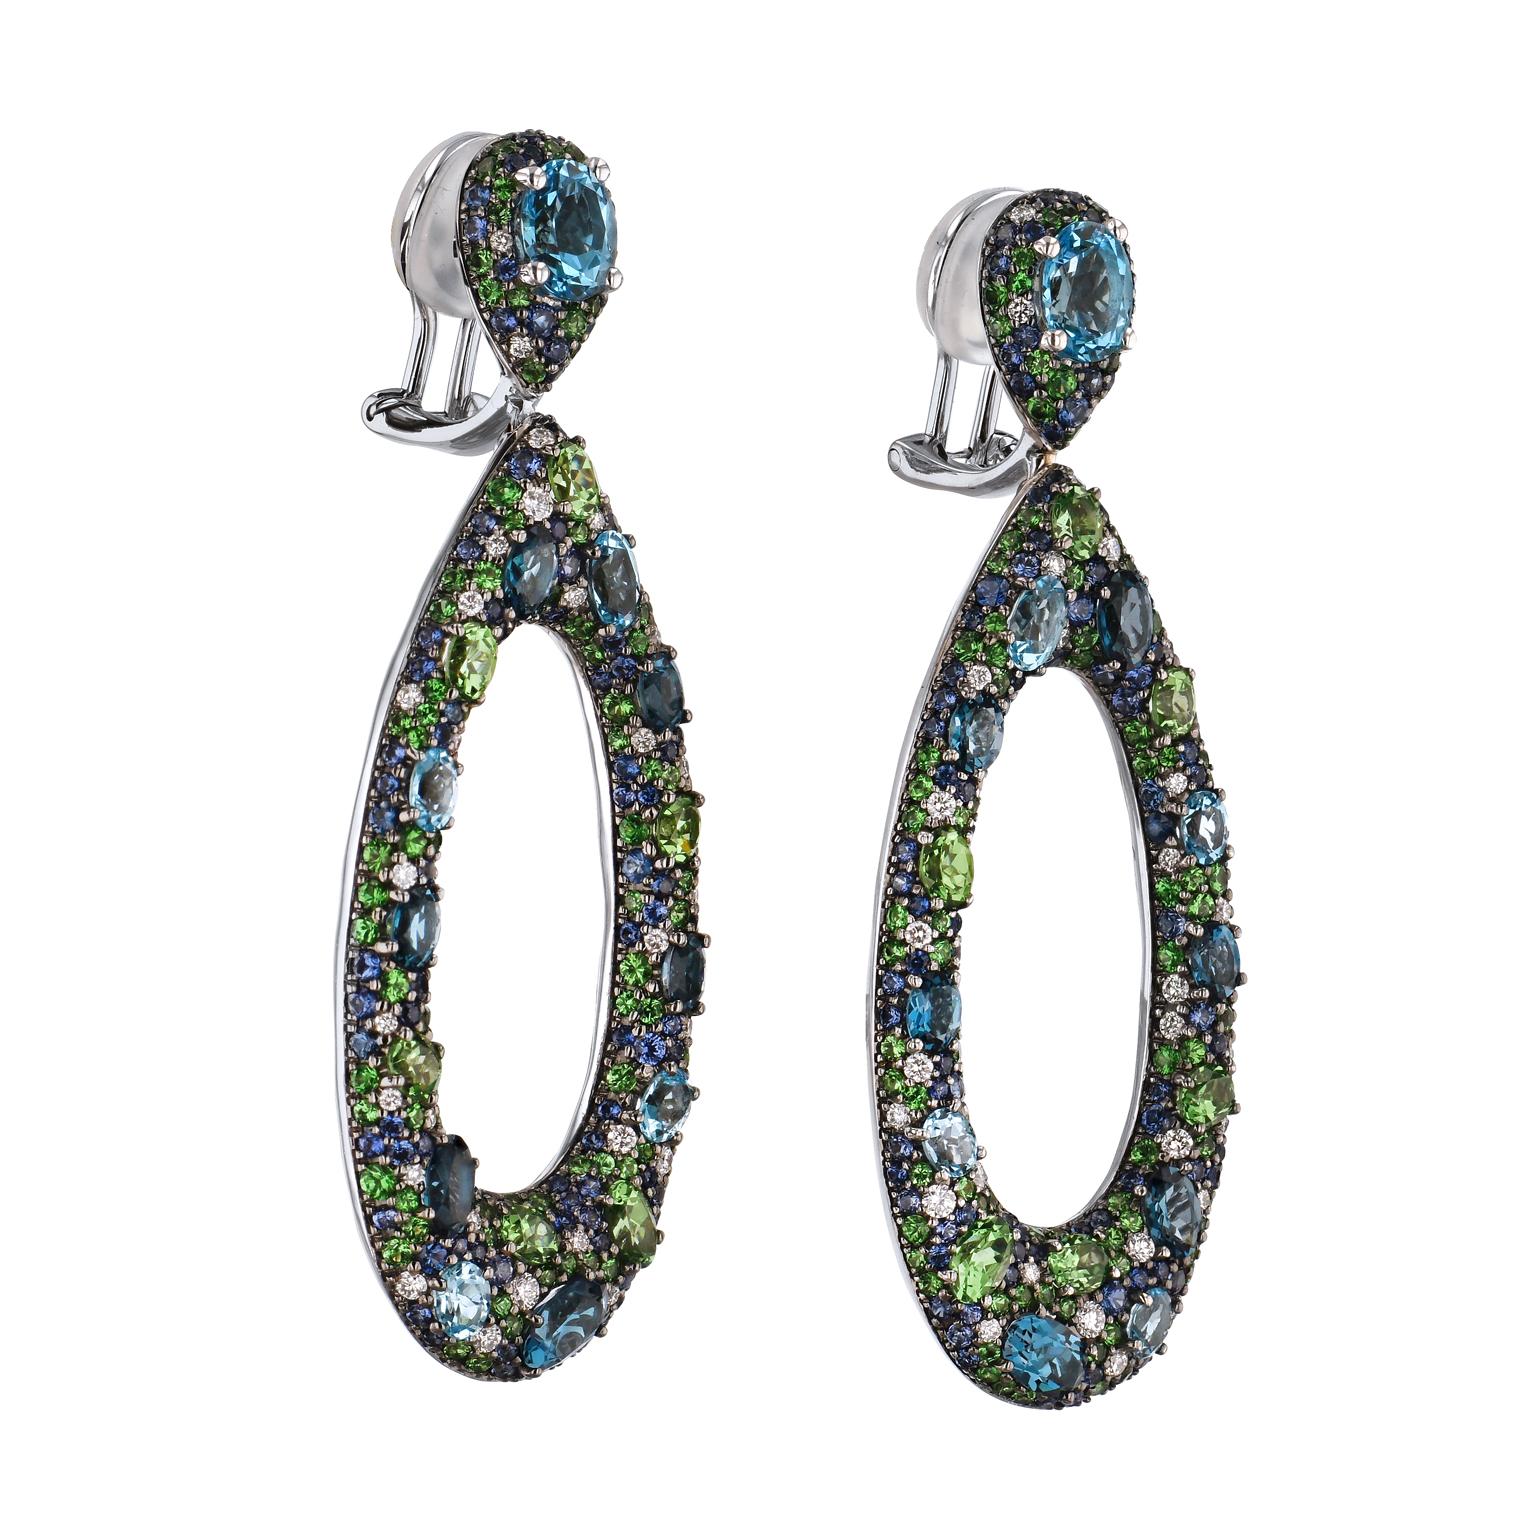 Show your fashion forward style with these intricately designed earrings, set with 6.99 carats of Blue Topaz, joined with dangling 18 karat white gold black rhodium plated teardrops adorned with a scattered variety of sapphires (3.04 carats in total